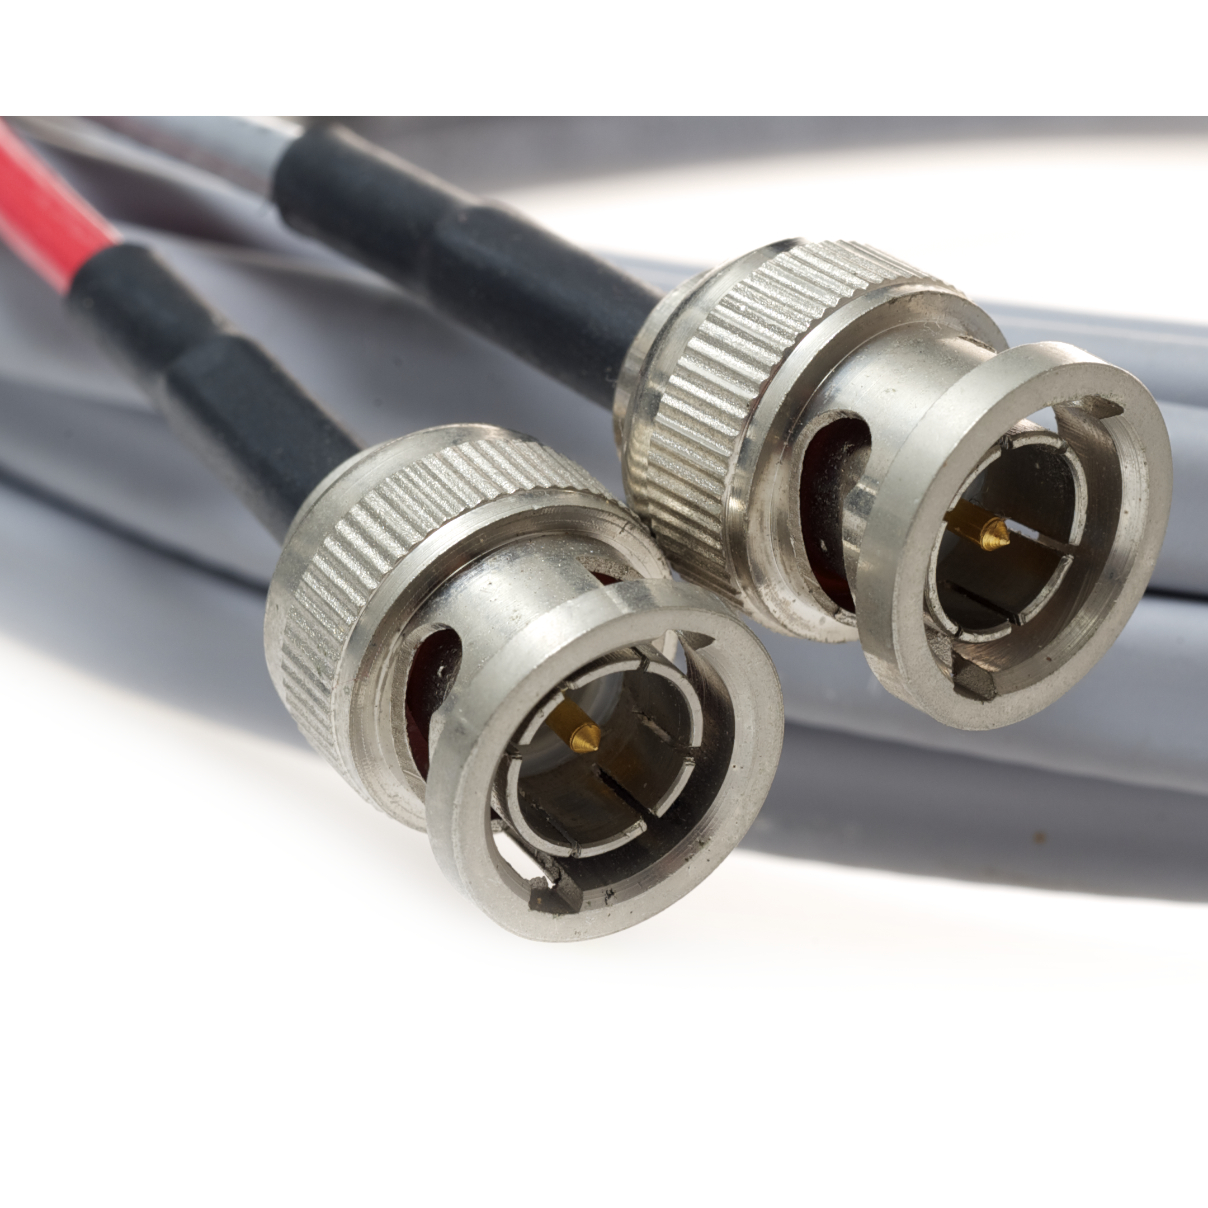 6 Feet DS3 735a Plenum  Coaxial Cable with Dual BNC 75 Ohm - 26 Awg